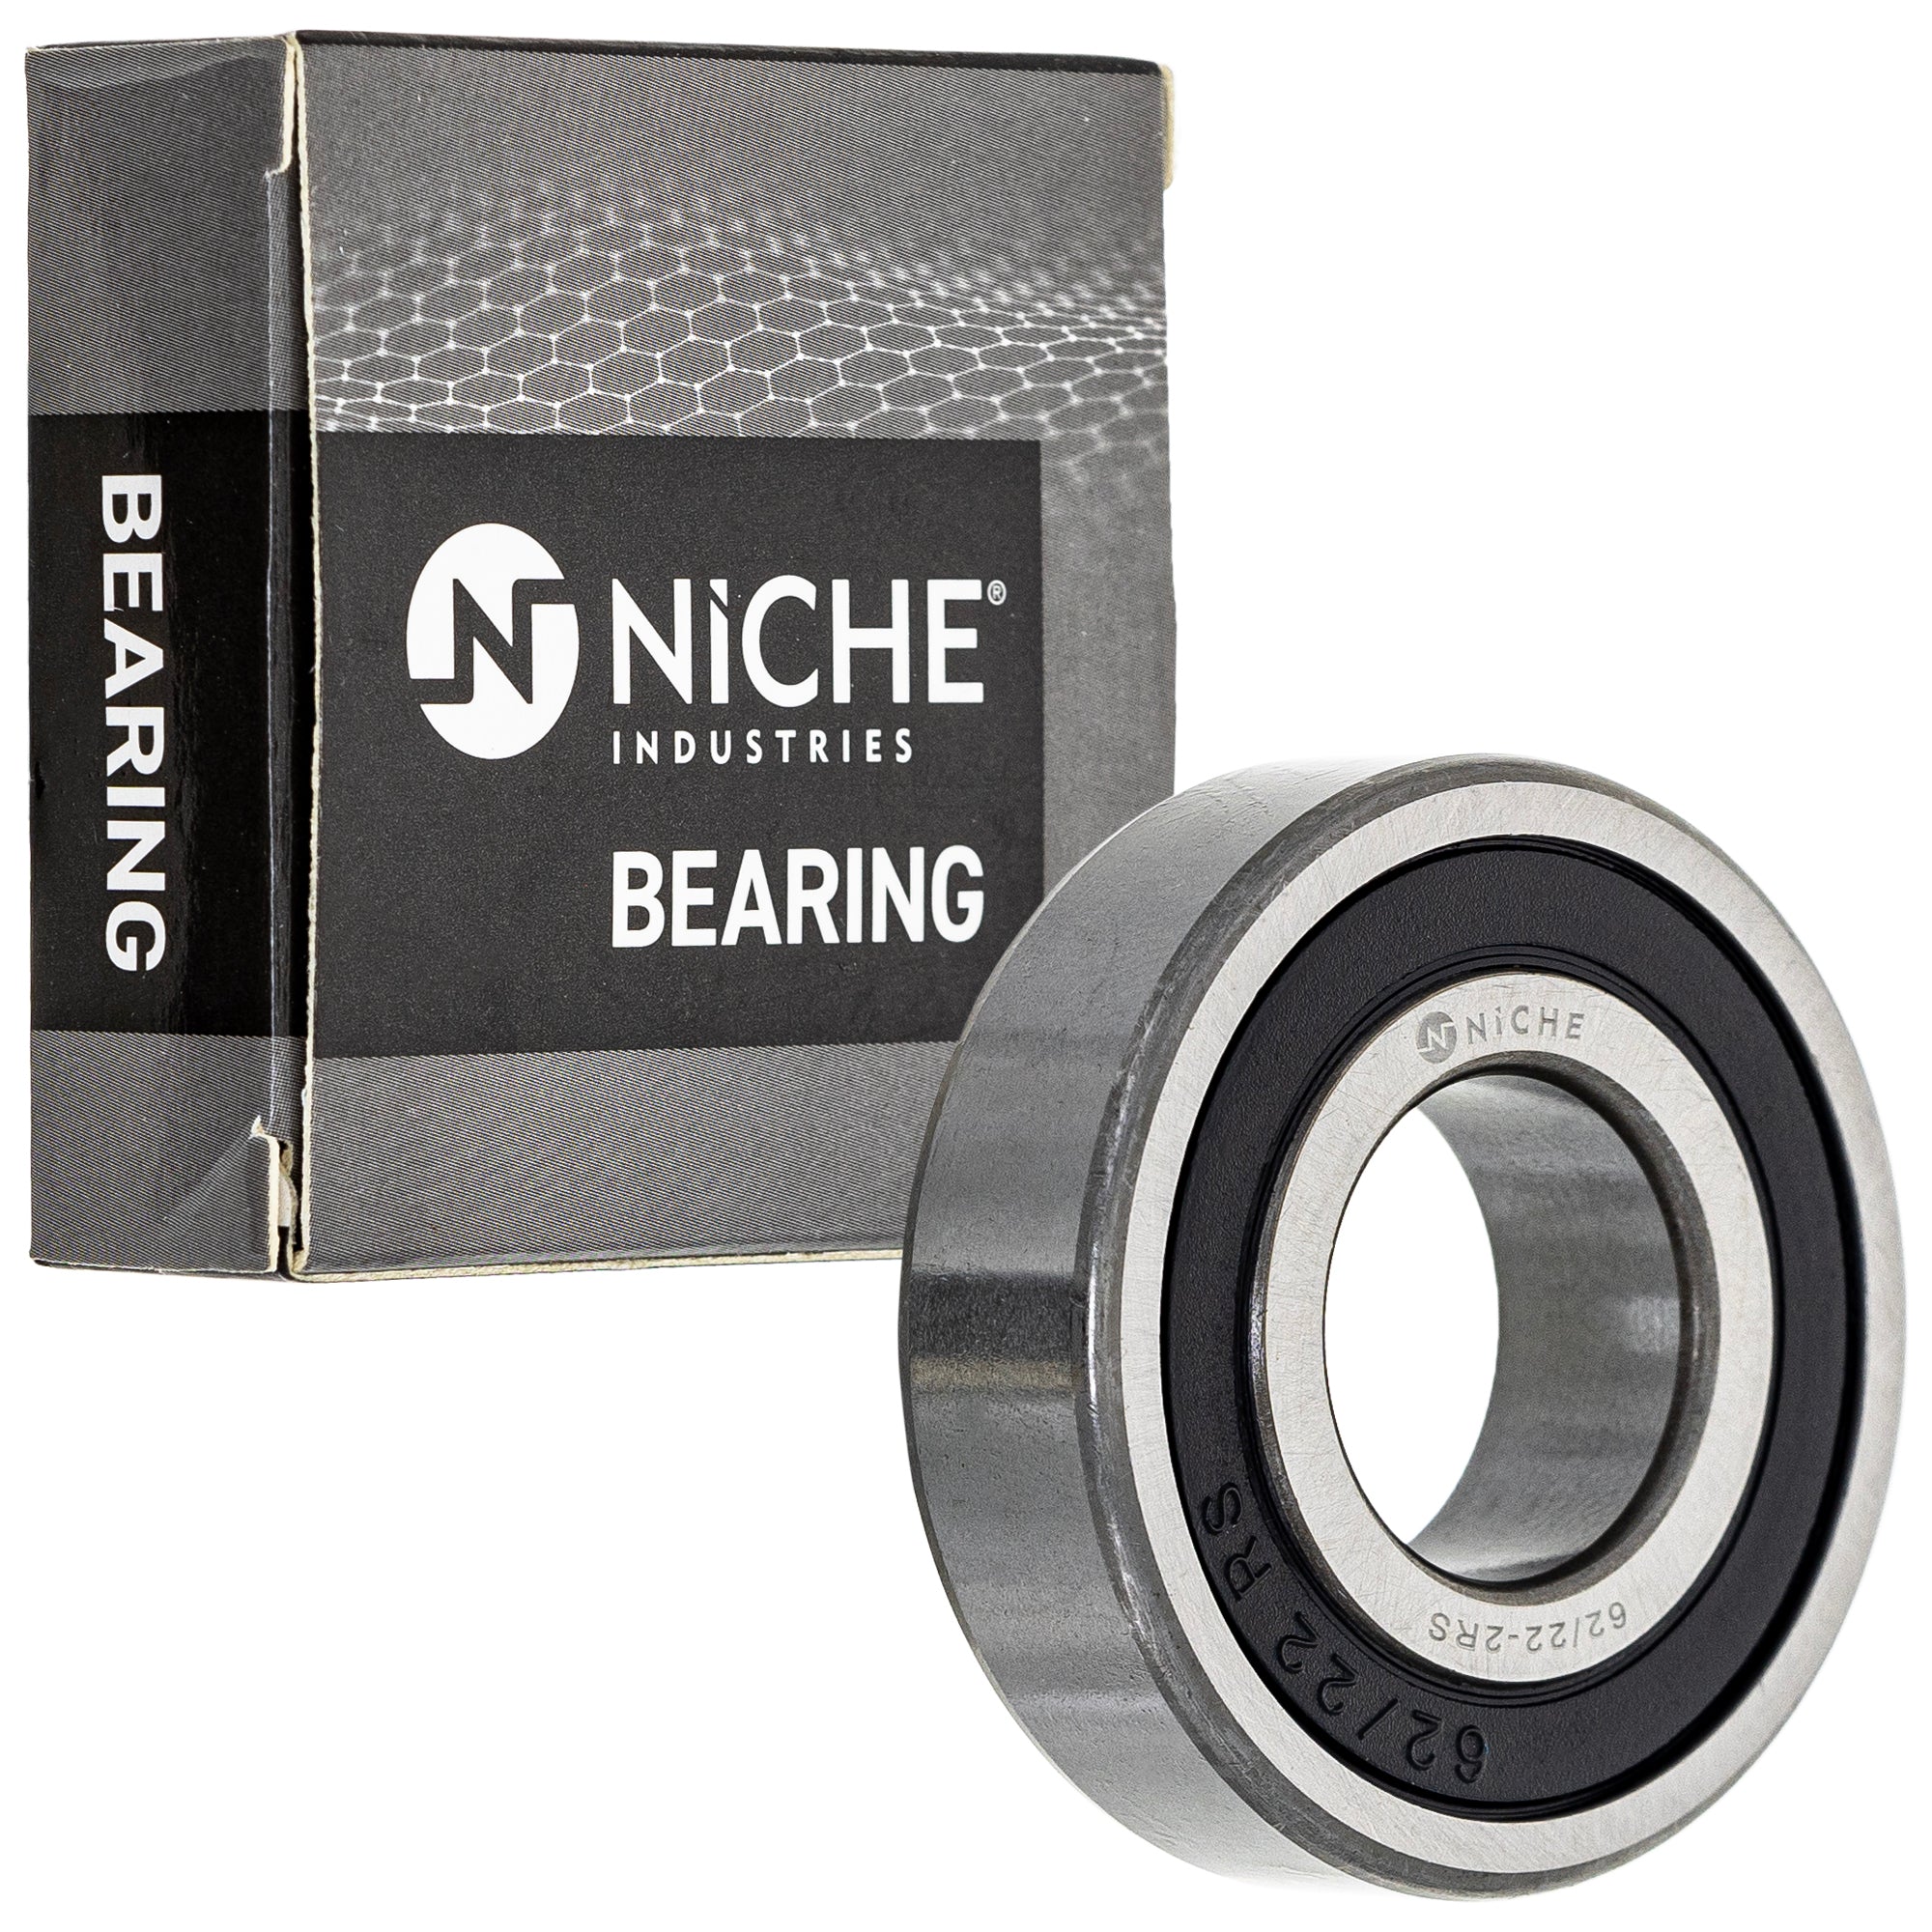 NICHE 519-CBB2271R Bearing & Seal Kit 10-Pack for zOTHER Shadow